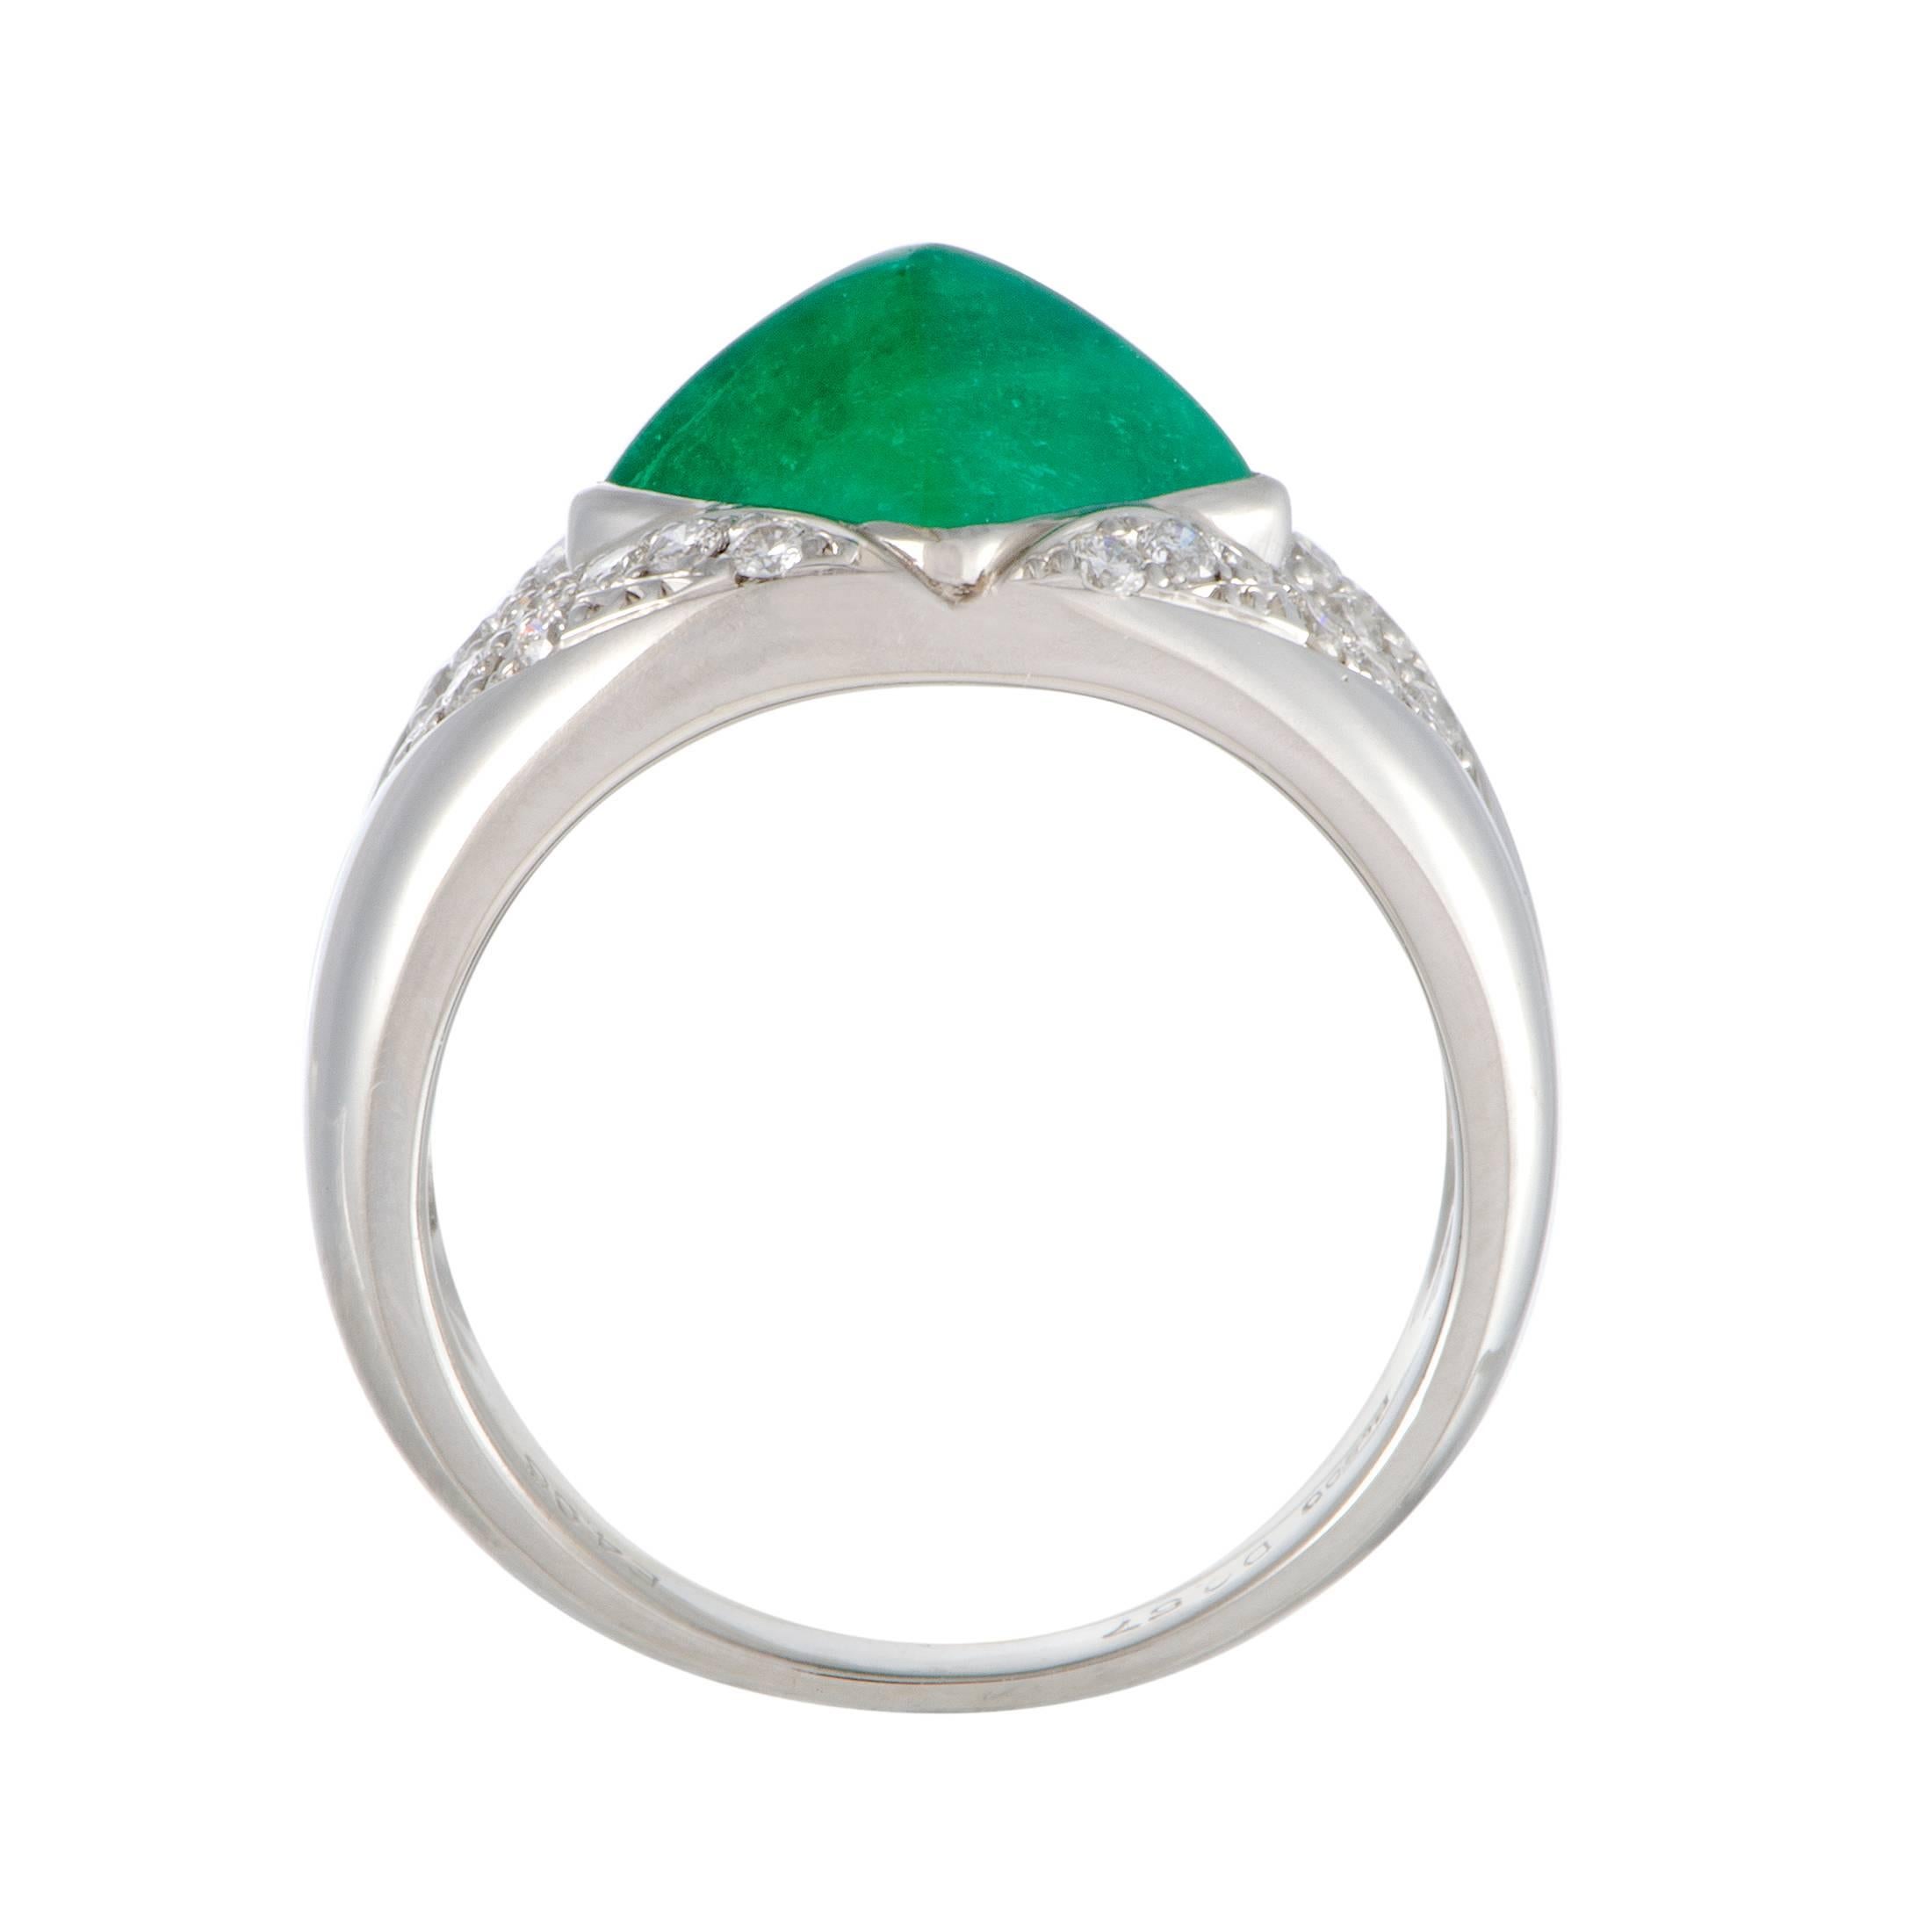 The captivating emerald allures with its ever-fascinating regal nuance in this gorgeous ring made of elegant platinum. The emerald weighs 4.06 carats and it is accentuated by scintillating diamond stones that total 0.57 carats.
Ring Size: 8.75
Ring